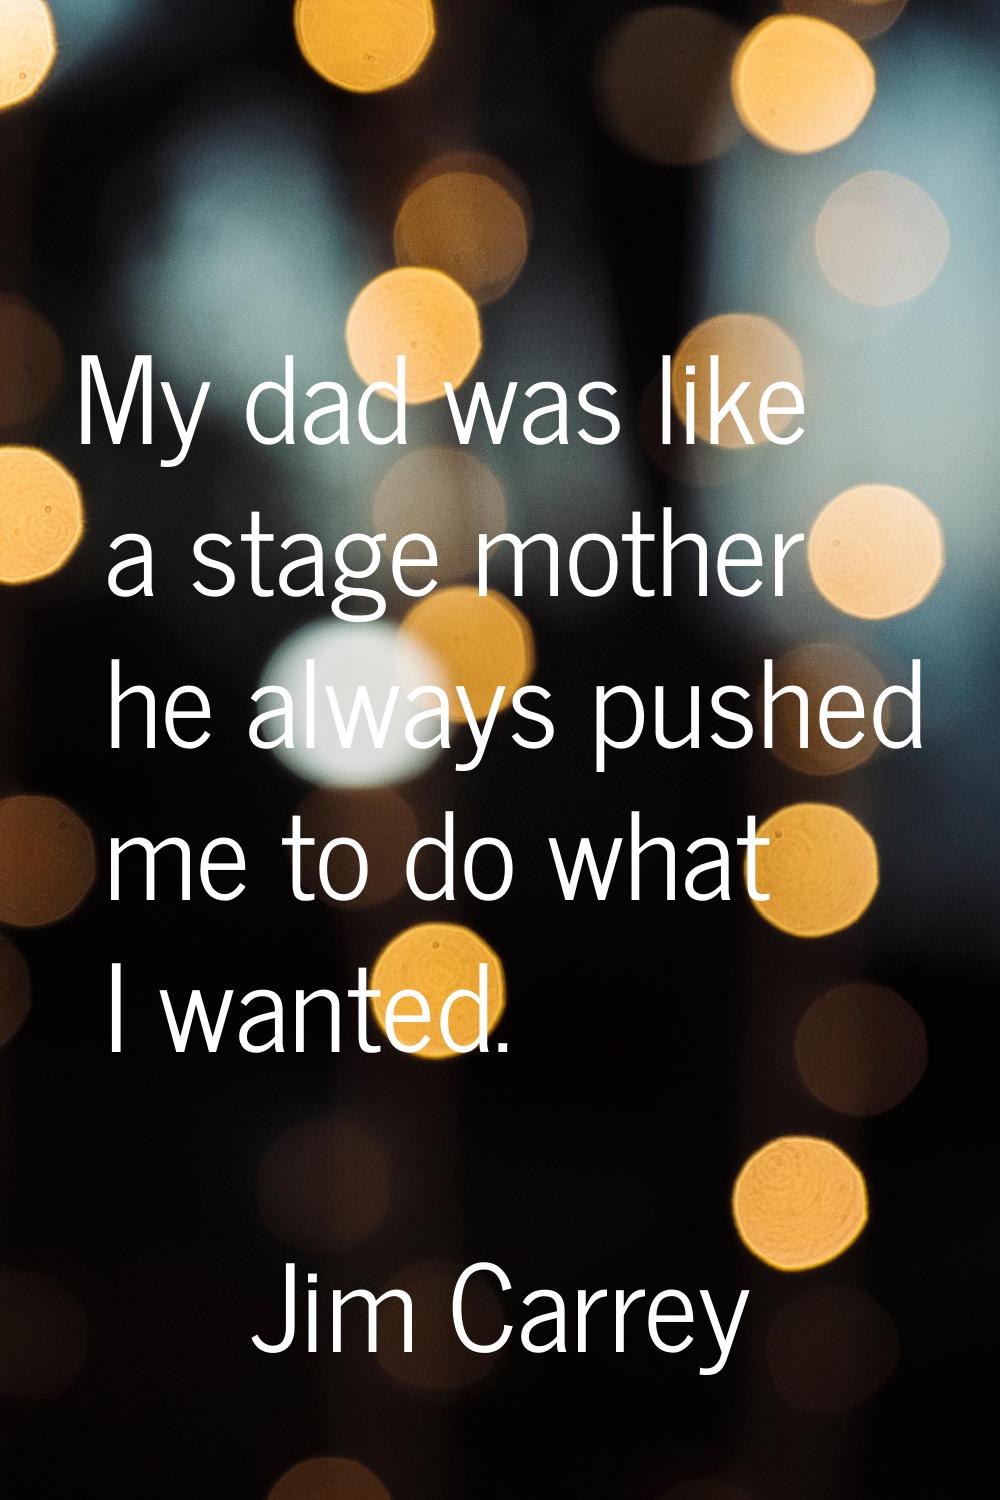 My dad was like a stage mother he always pushed me to do what I wanted.